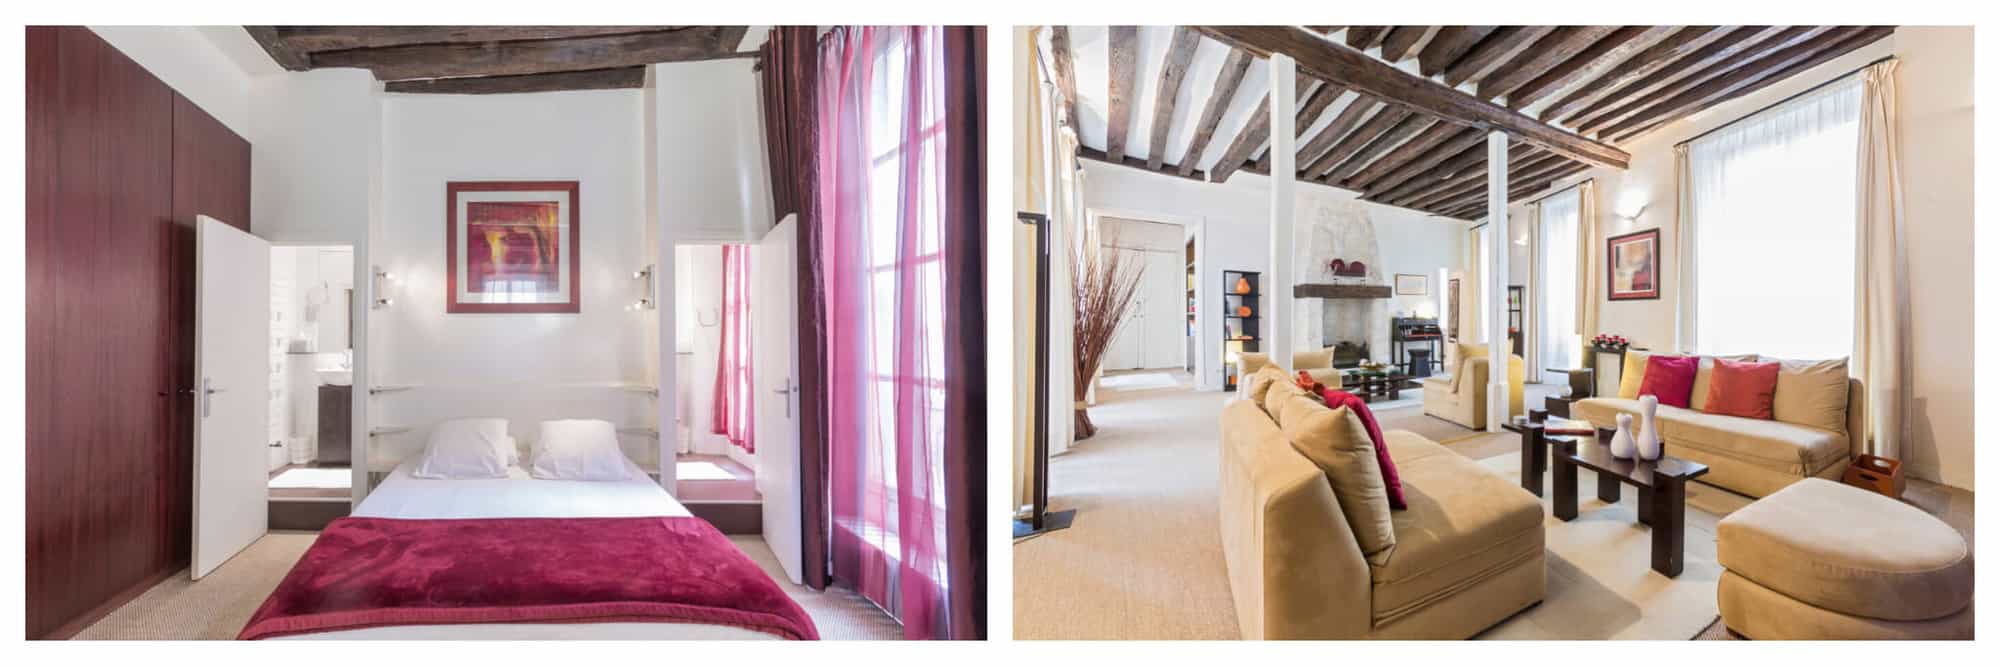 Left: a bedroom with a bed in the centre with white and red linens, with doors to the ensuite on either side. There are cupboards on the left and windows on the right with red sheer curtains. Right: a living room with couches, a stool, a coffee table, and in the background a fireplace. There are wooden beams on the roof. 